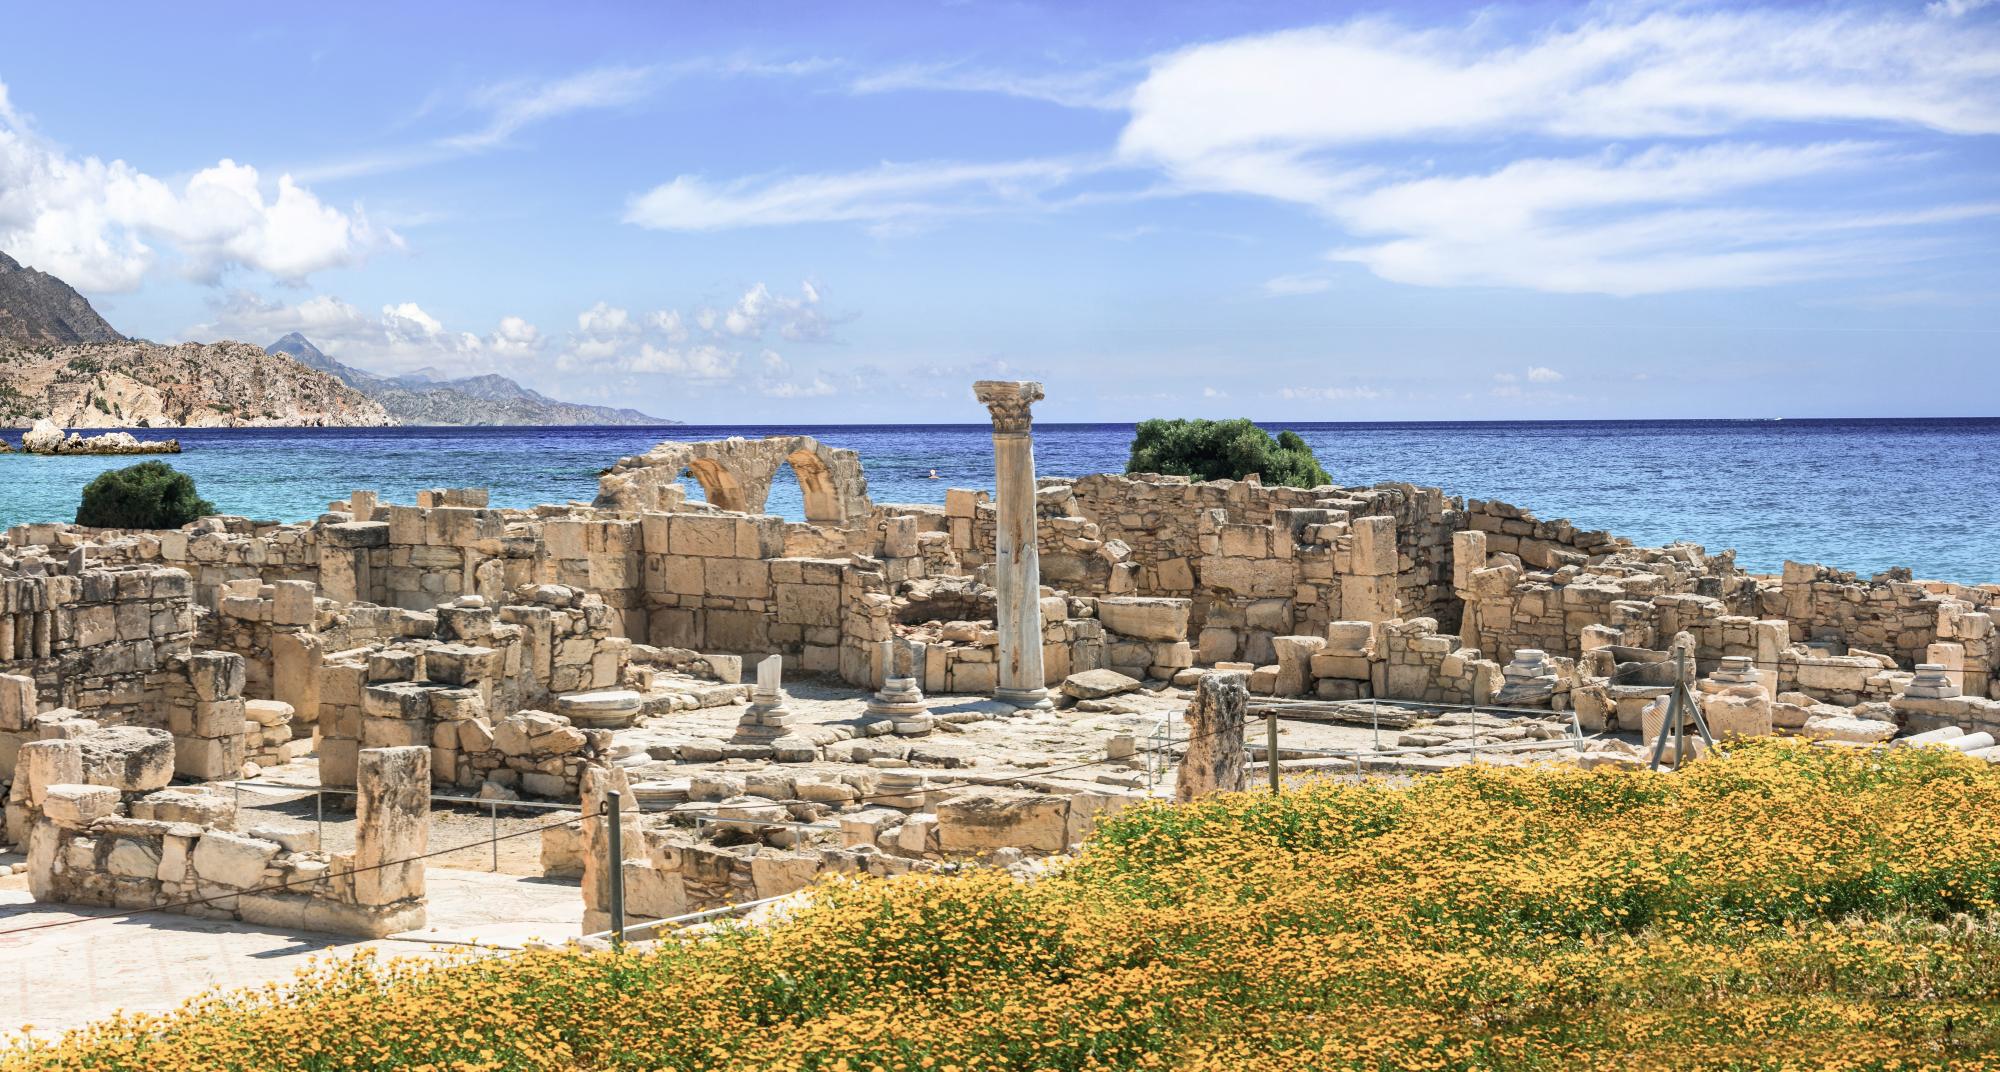 In the footsteps of Aphrodite